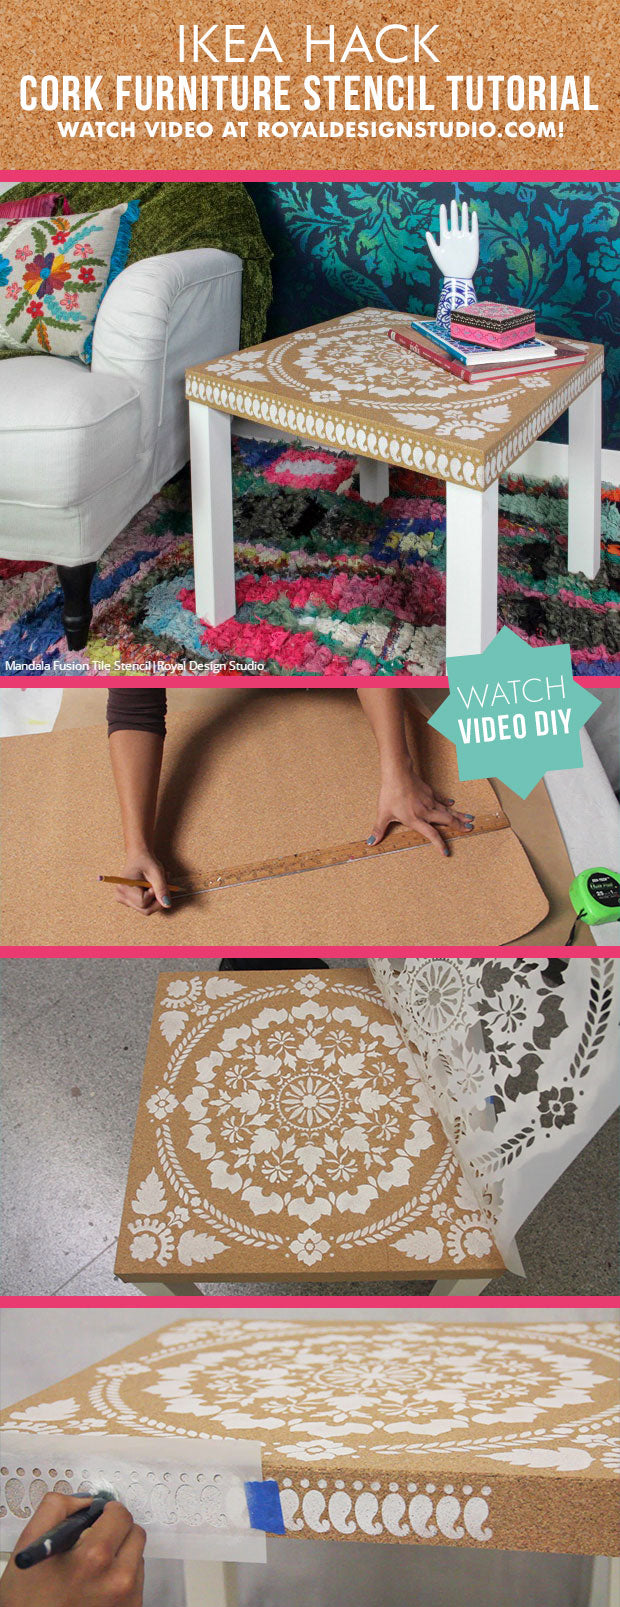 DIY Home Decor Ikea Hack: How to Stencil Furniture with Cork Sheets - VIDEO TUTORIAL by Royal Design Studio